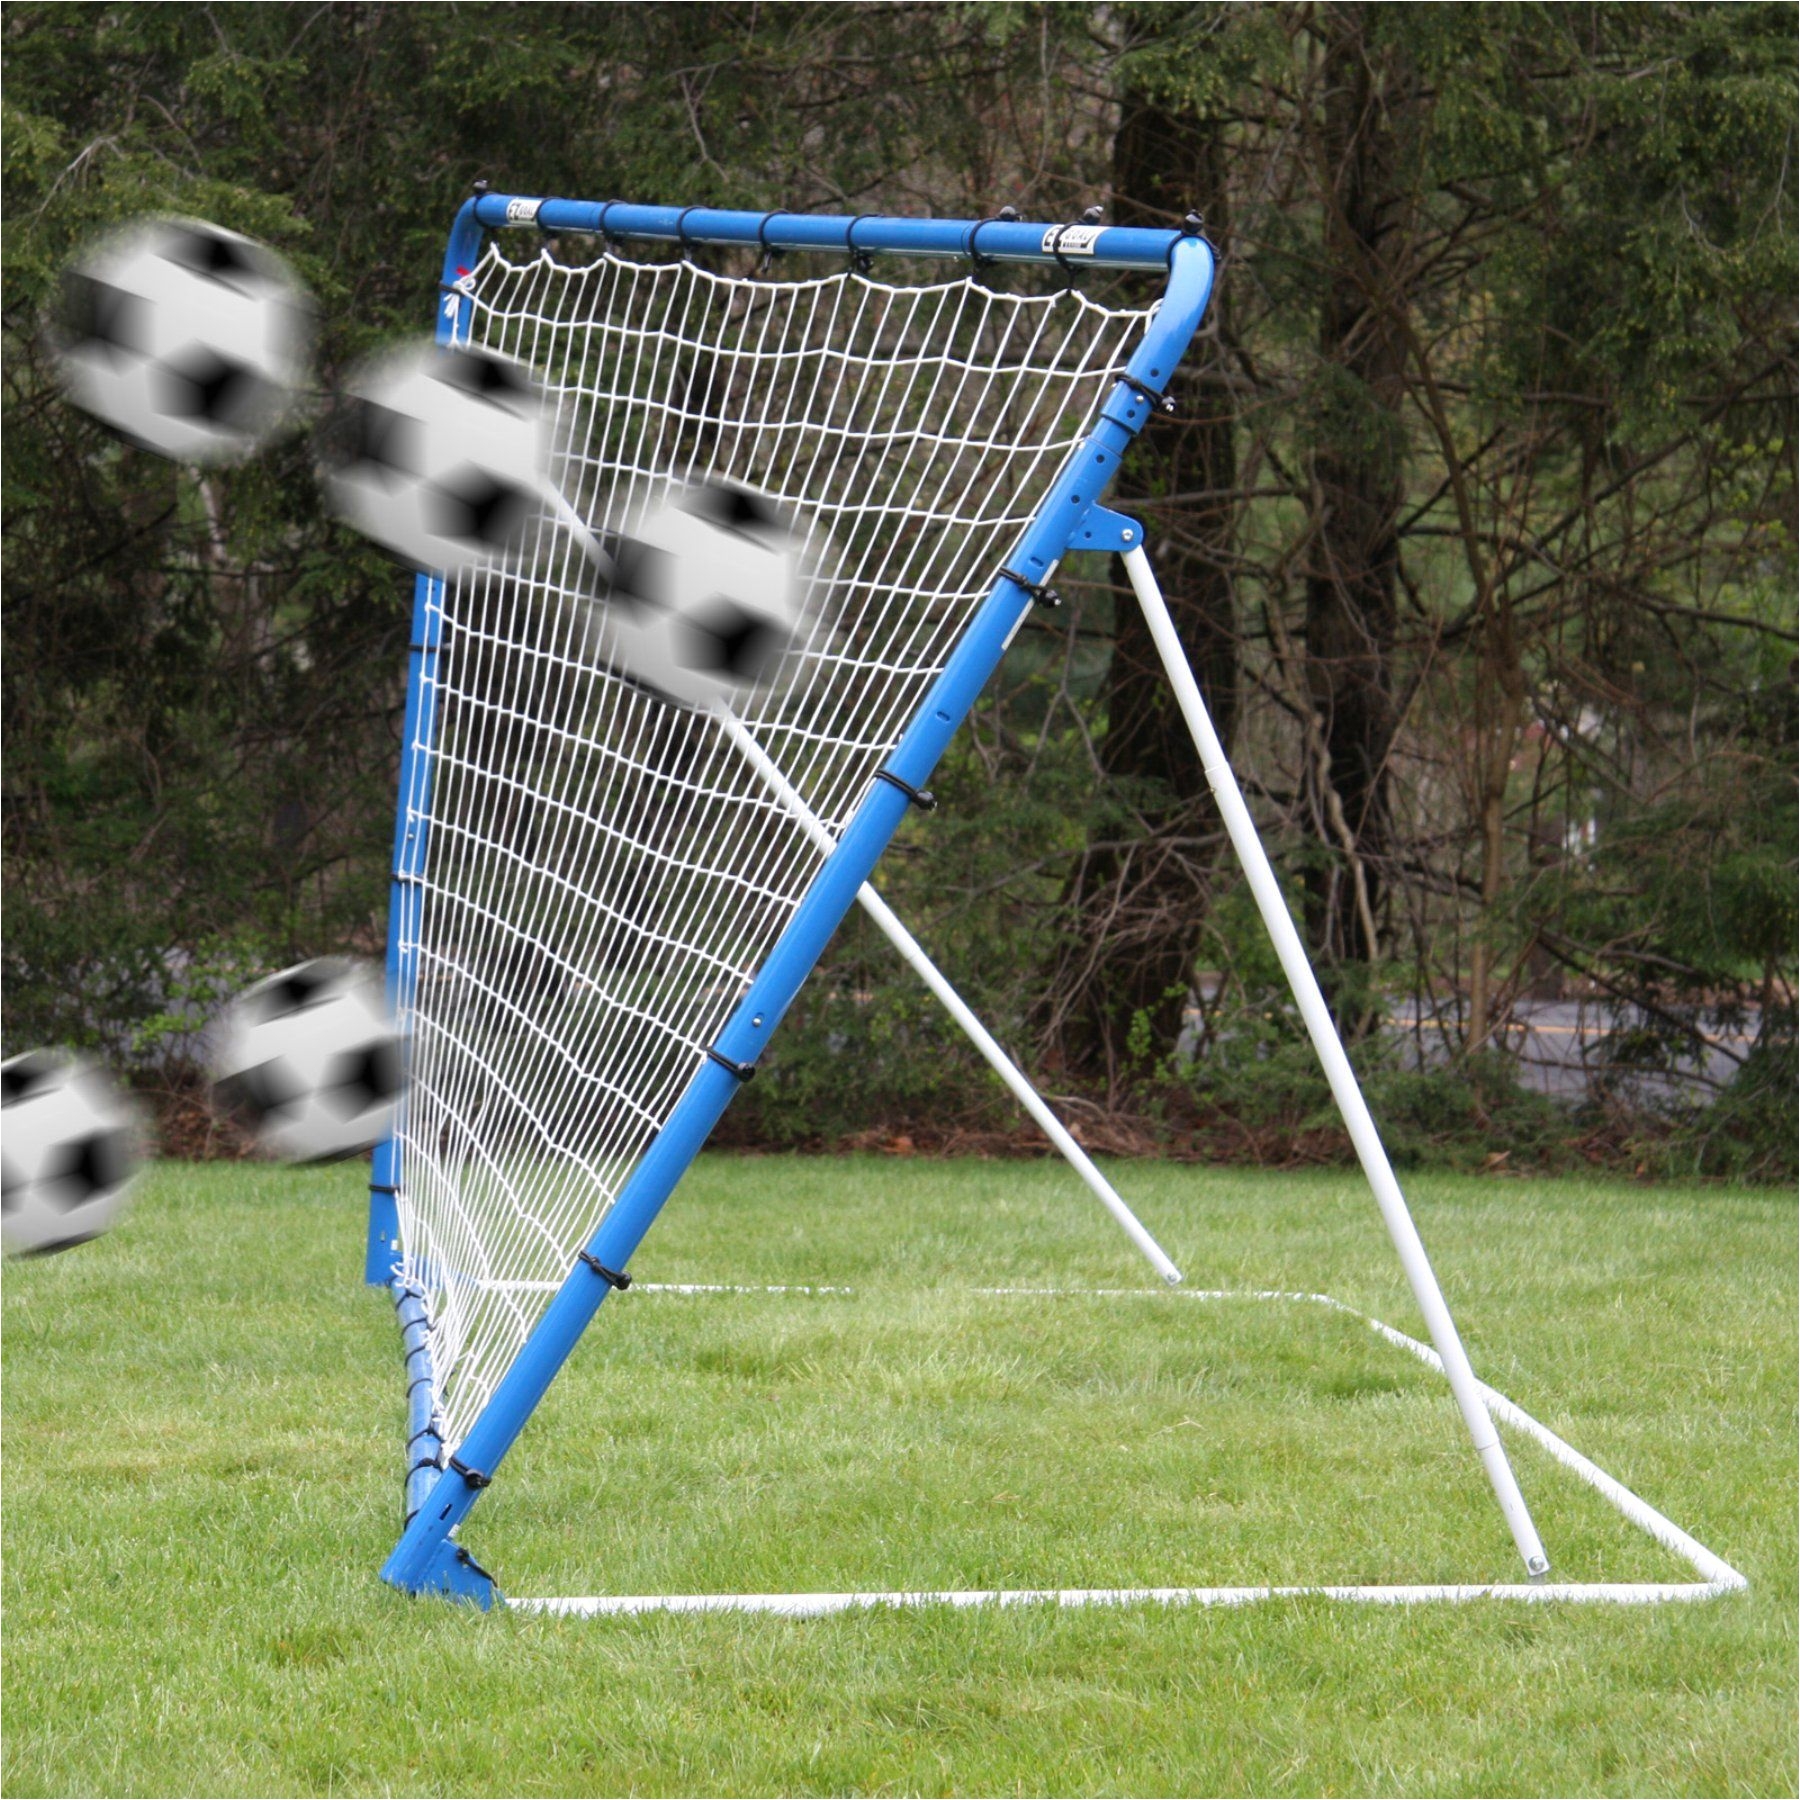 goals and nets 159180 clearance all steel no pvc 12 x 6 5 heavy duty soccer goal with net buy it now only 200 on ebay pinterest goal